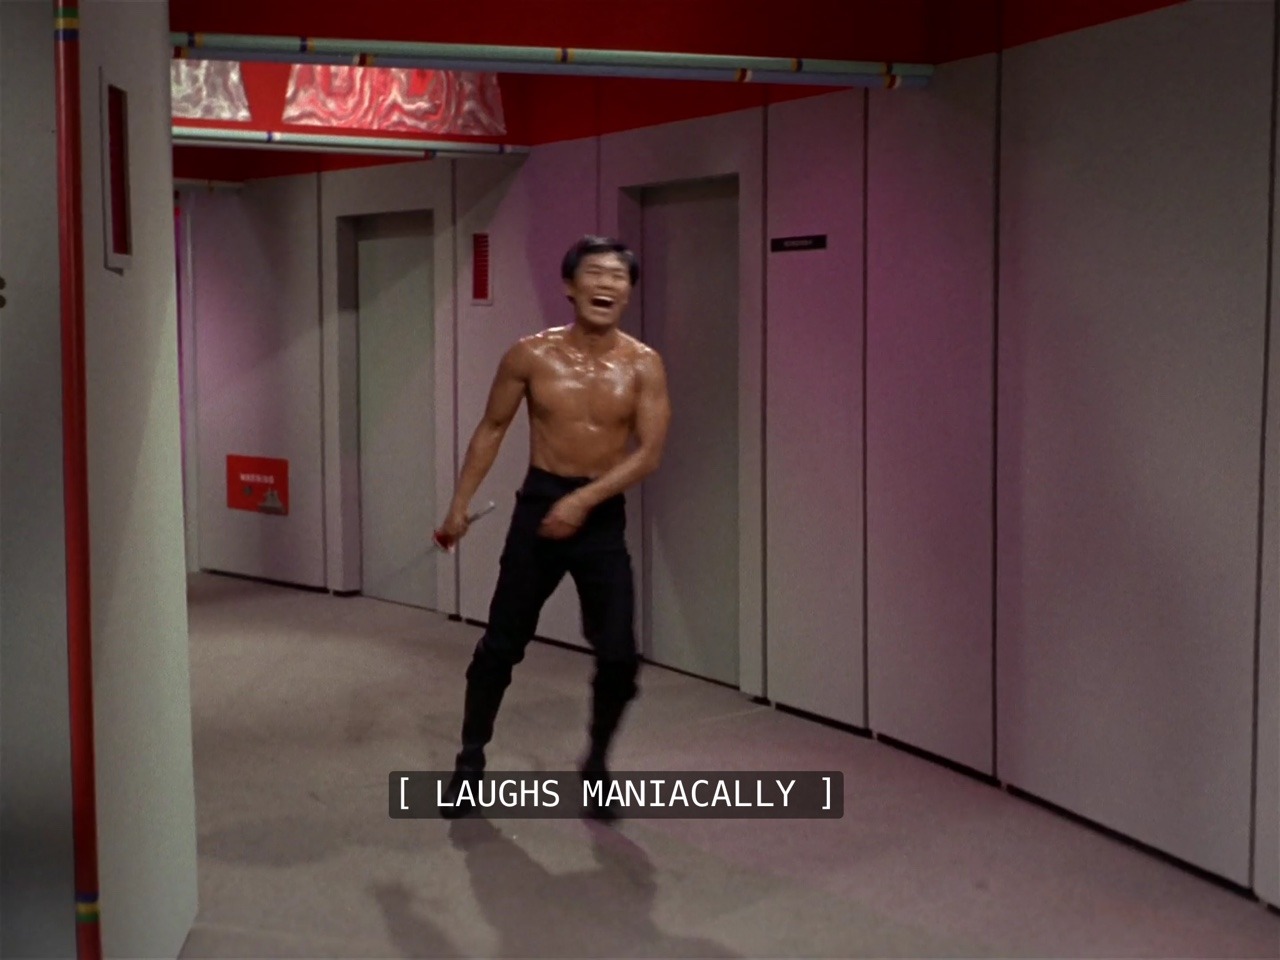 Darkrainbow13 George Takei Was So Excited To Do This Shirtless Episode